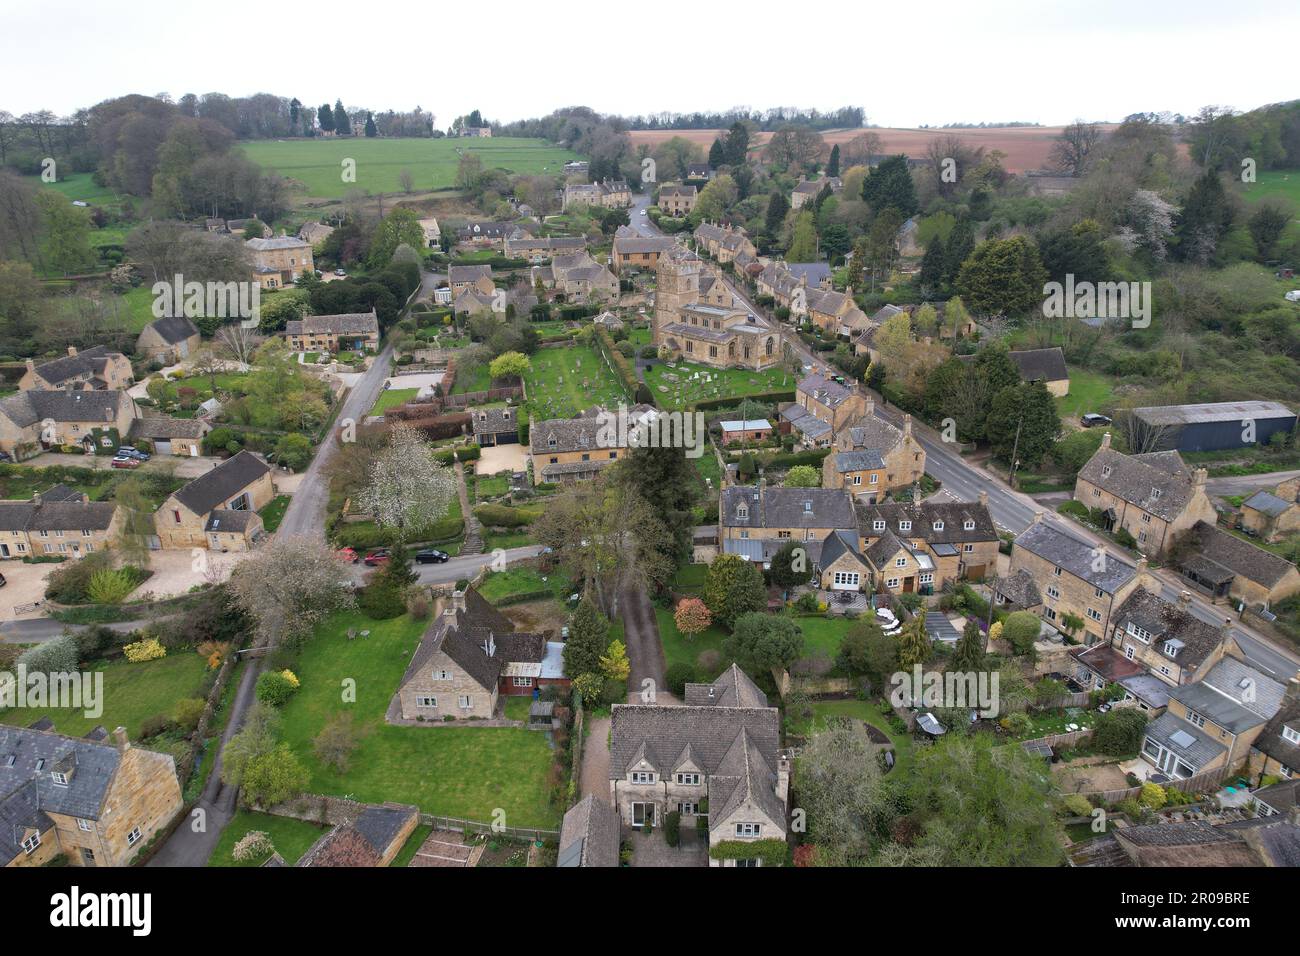 Bourton on the Hill Cotswold village UK drone aerial view Stock Photo